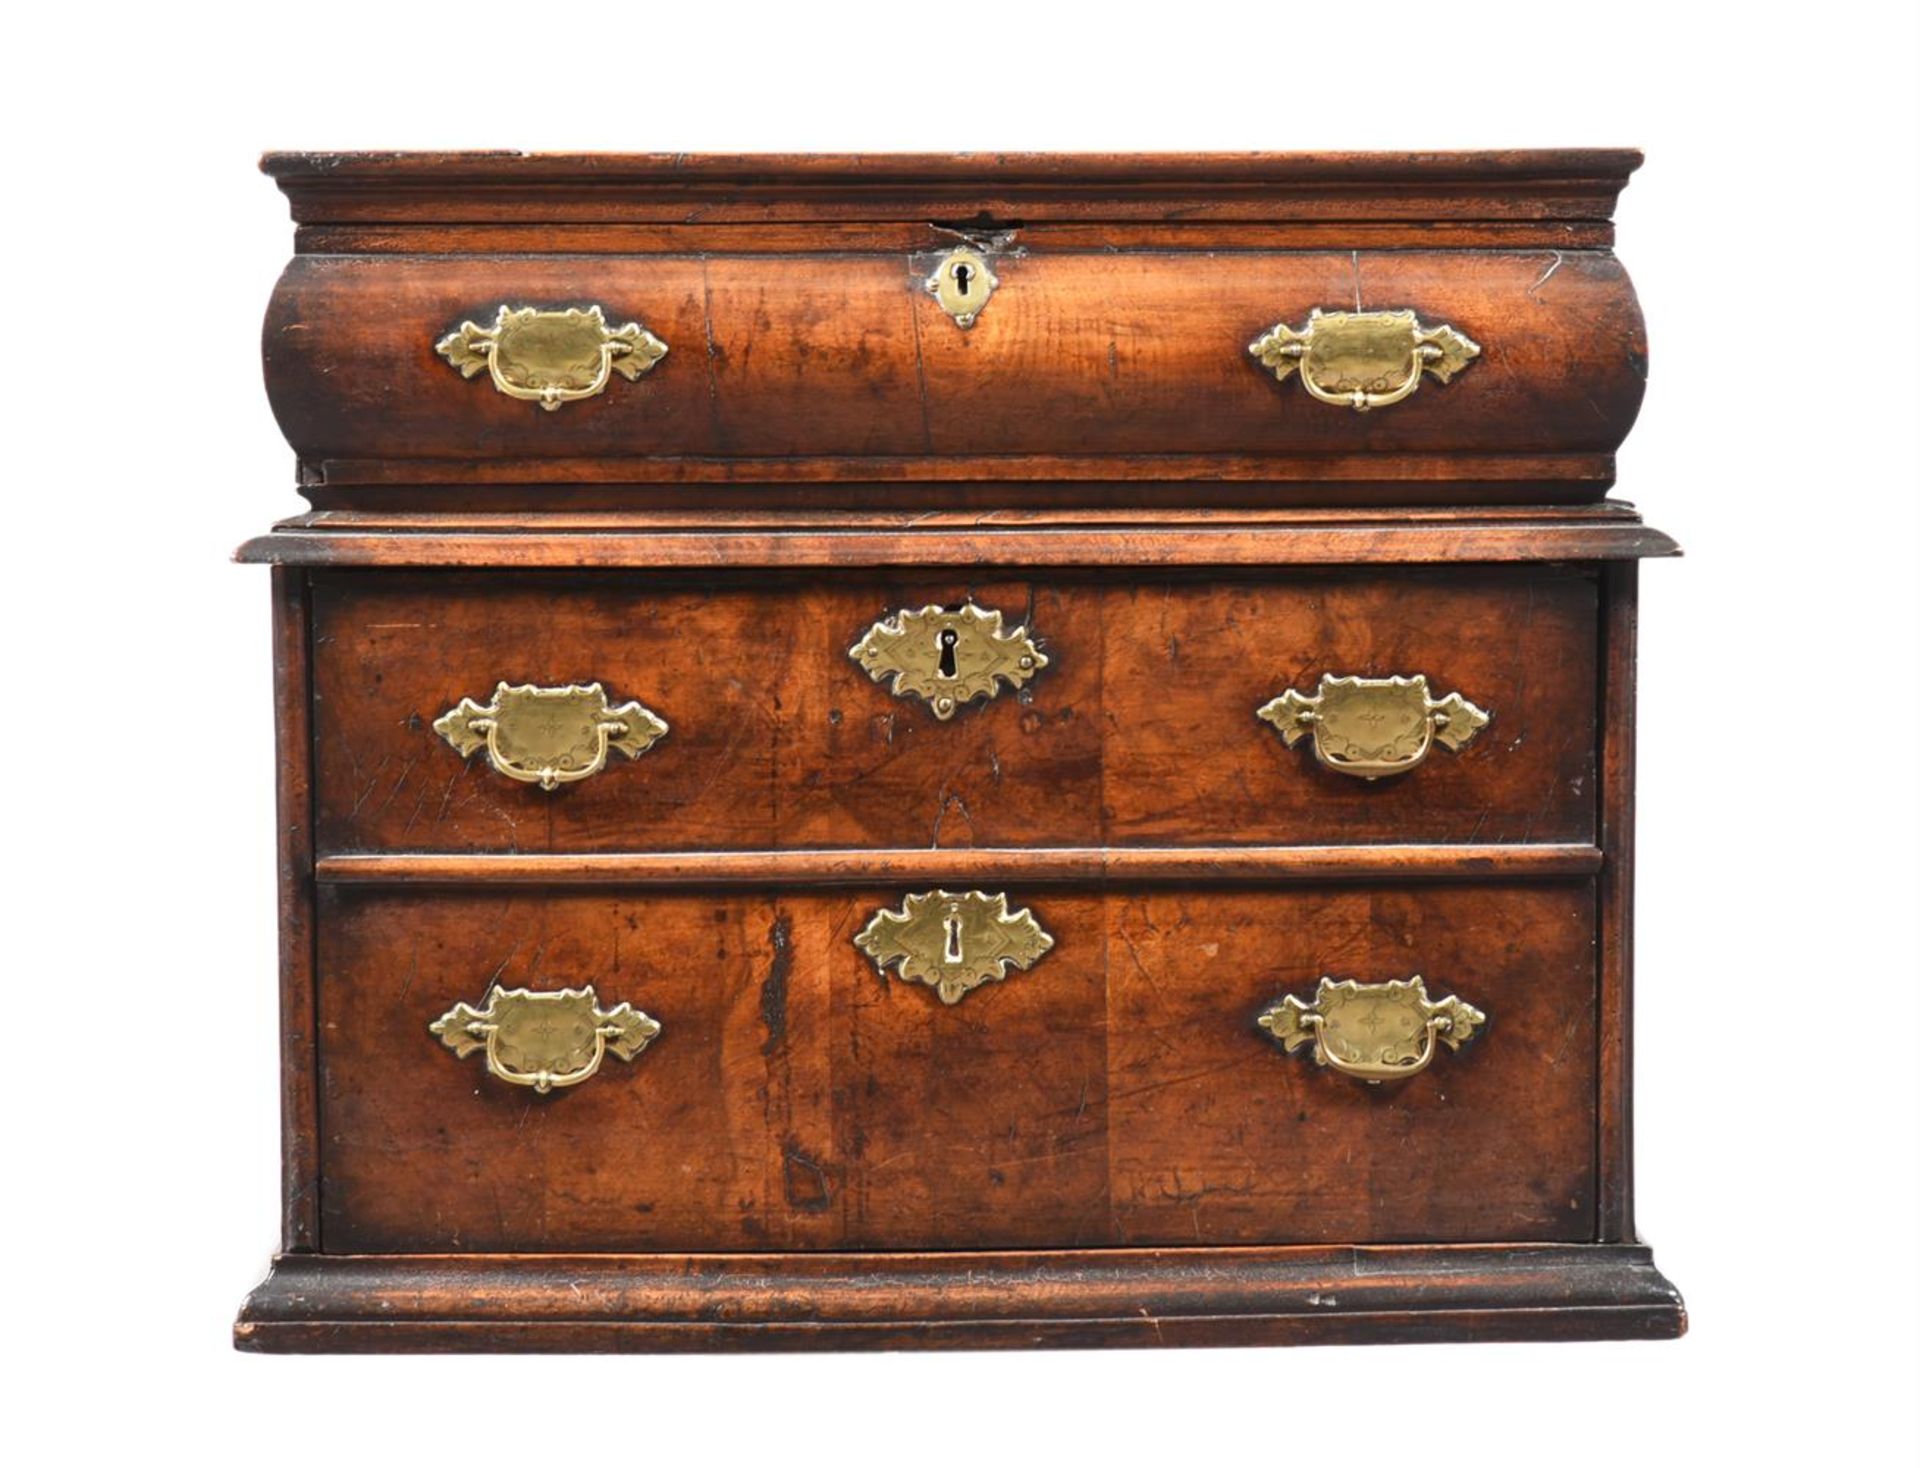 AN UNUSUAL SMALL QUEEN ANNE WALNUT CHEST OF DRAWERS, CIRCA 1710